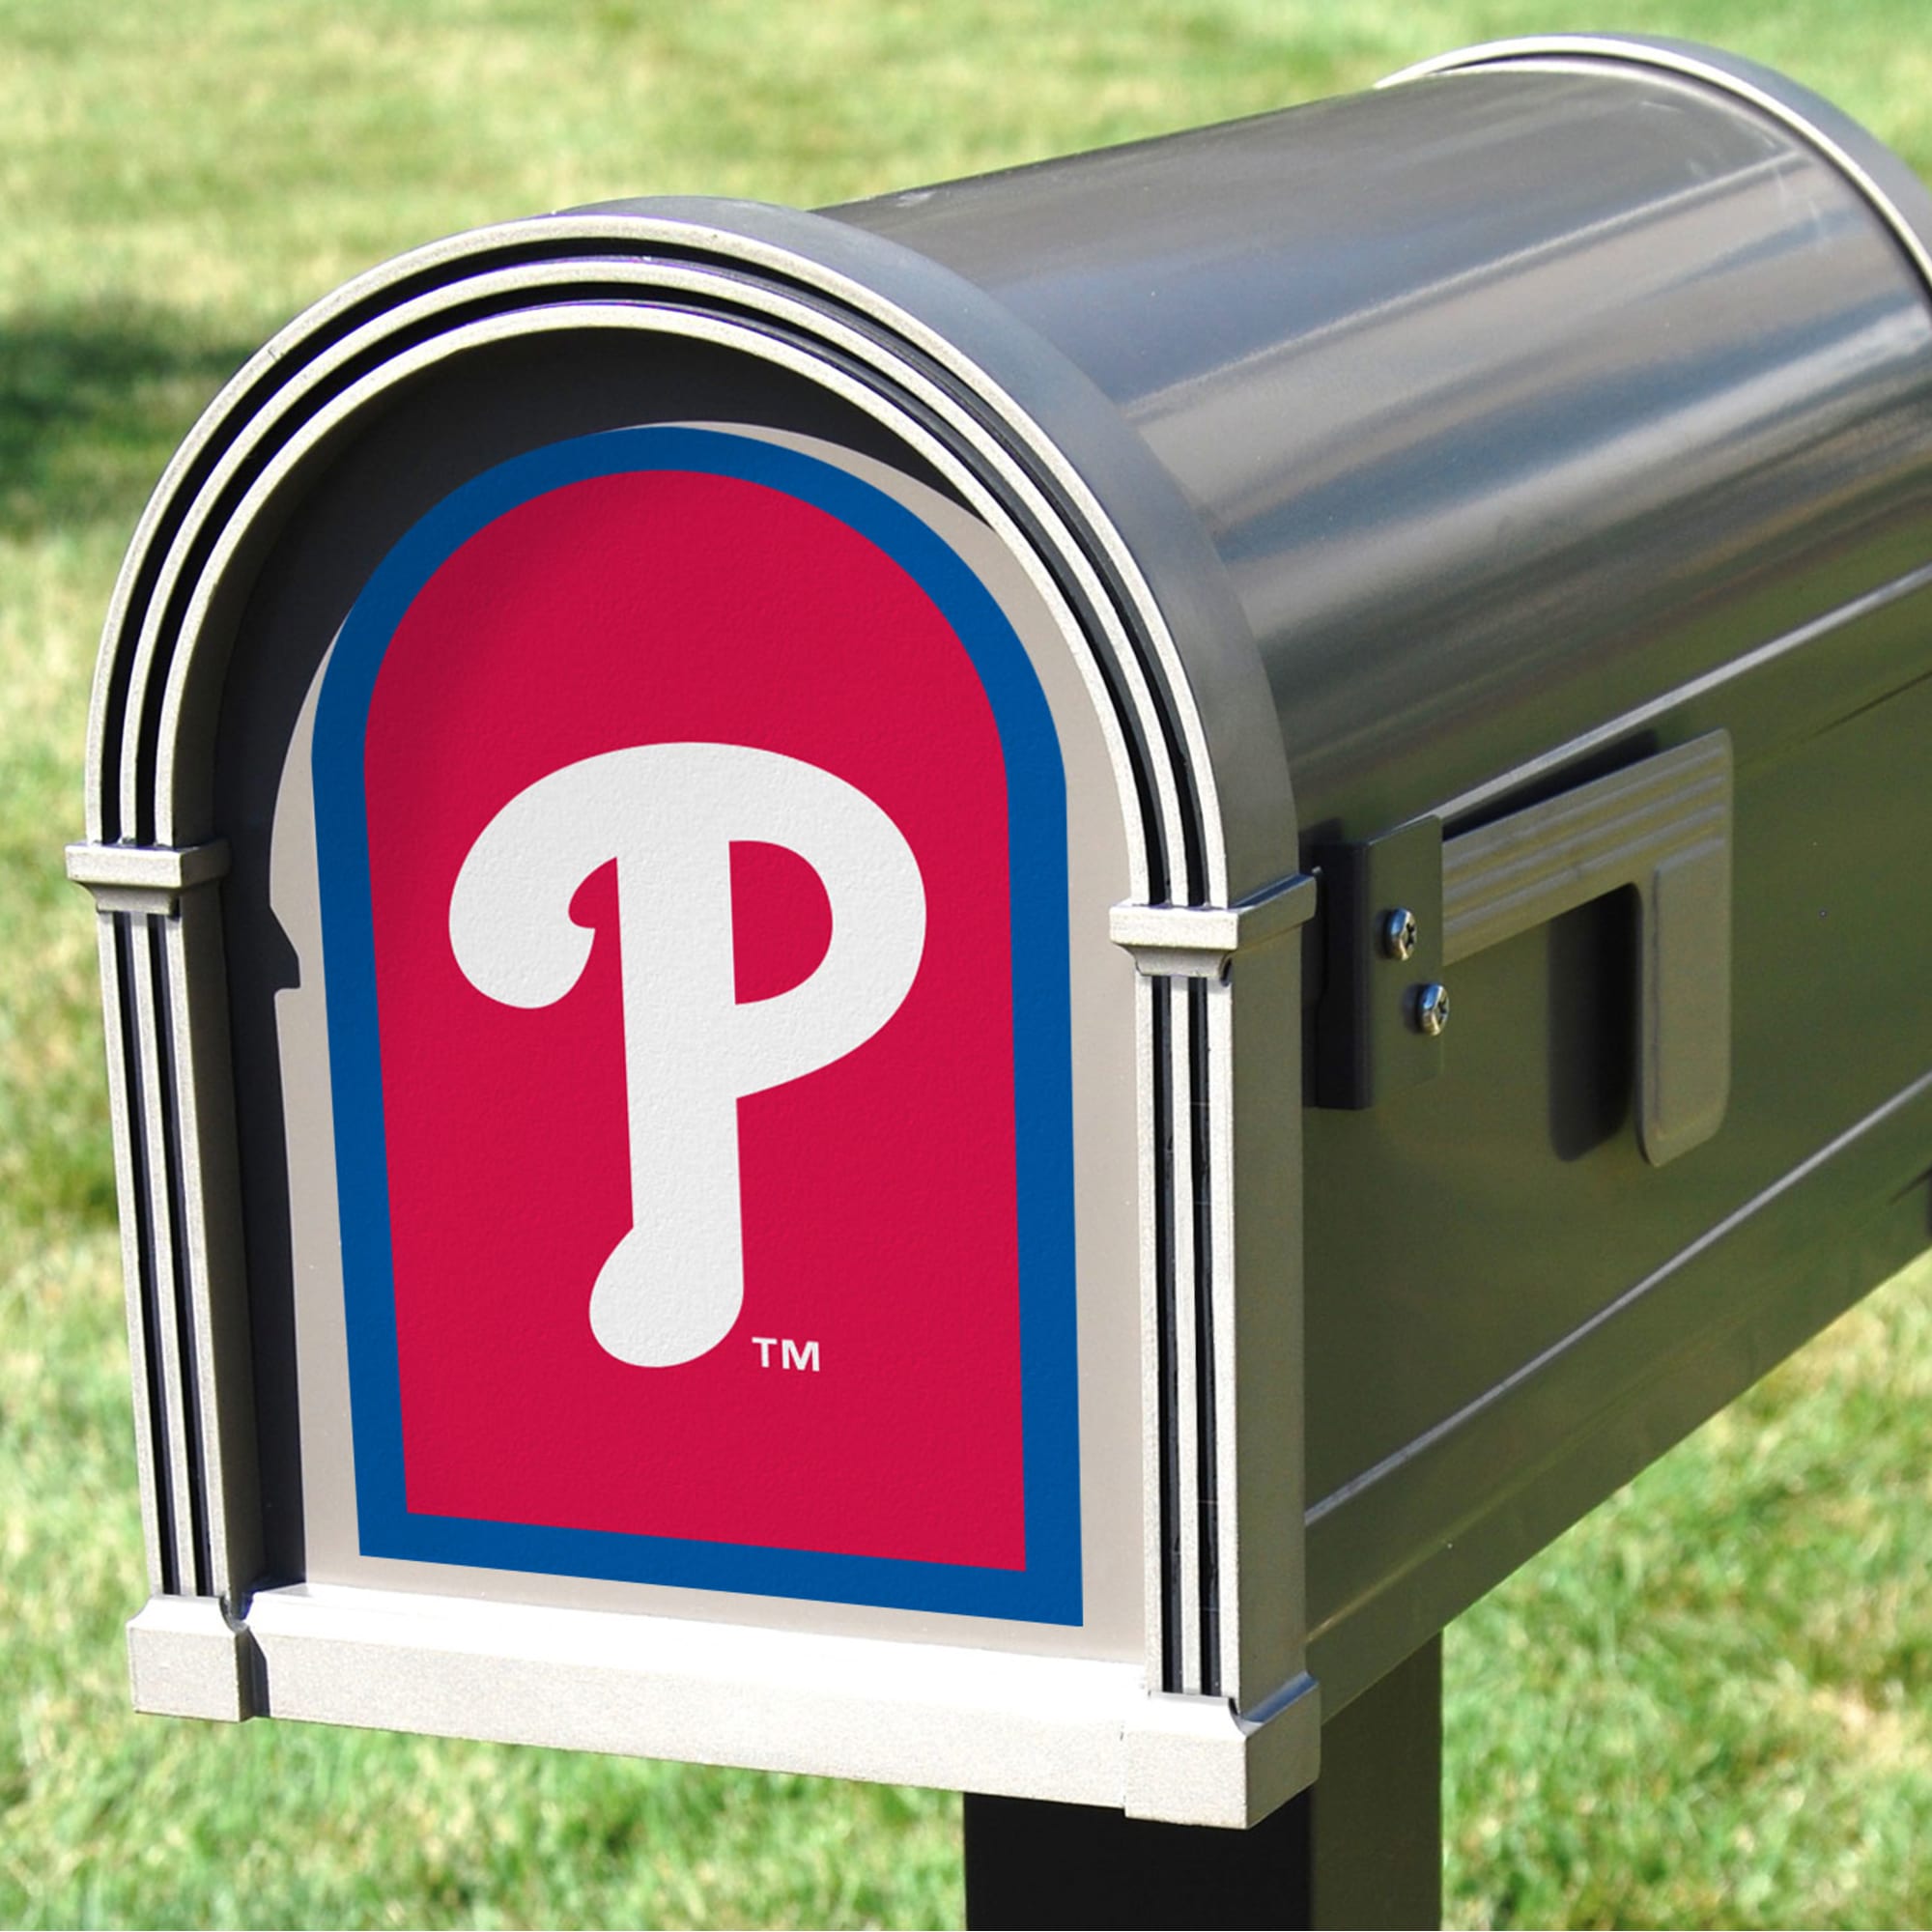 Philadelphia Phillies: Mailbox Logo - Officially Licensed MLB Outdoor Graphic 5.0"W x 8.0"H by Fathead | Wood/Aluminum